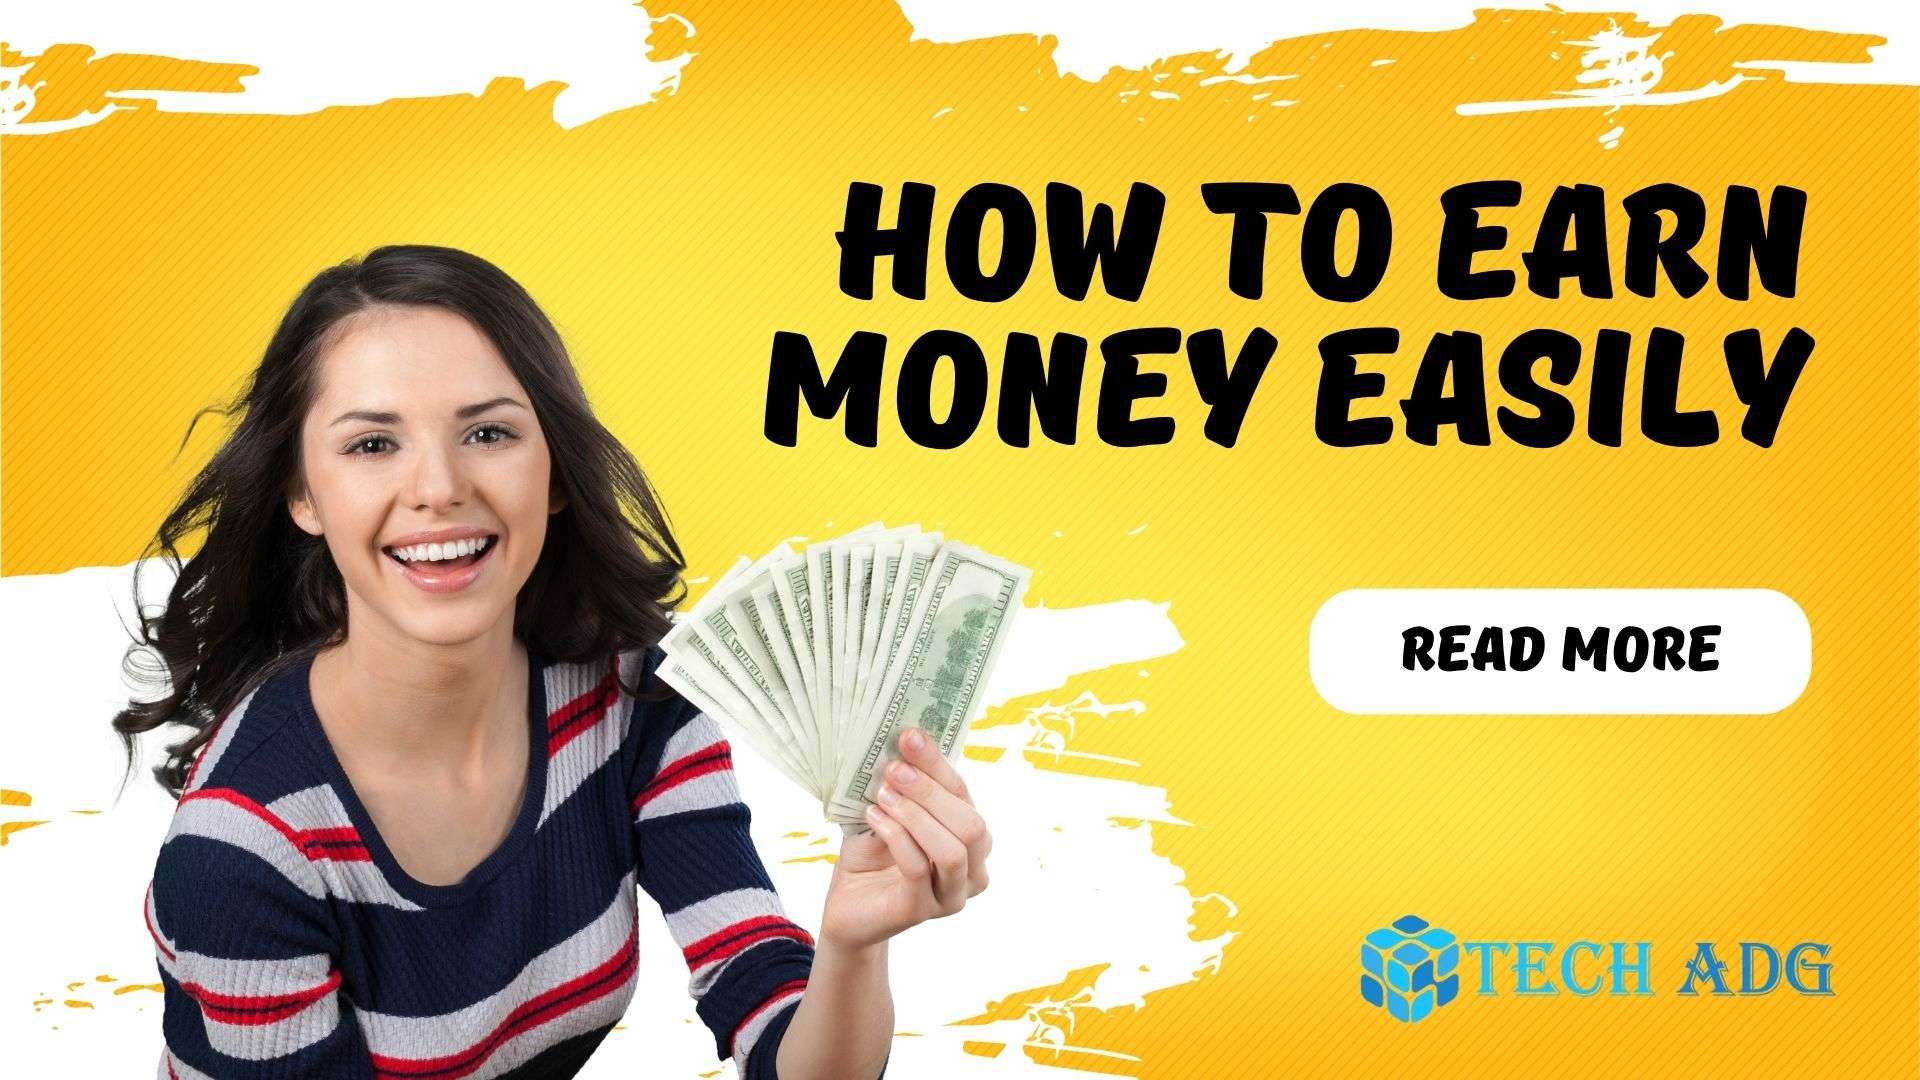 HOW TO MAKE MONEY BY DOING SIMPLE TASKS?